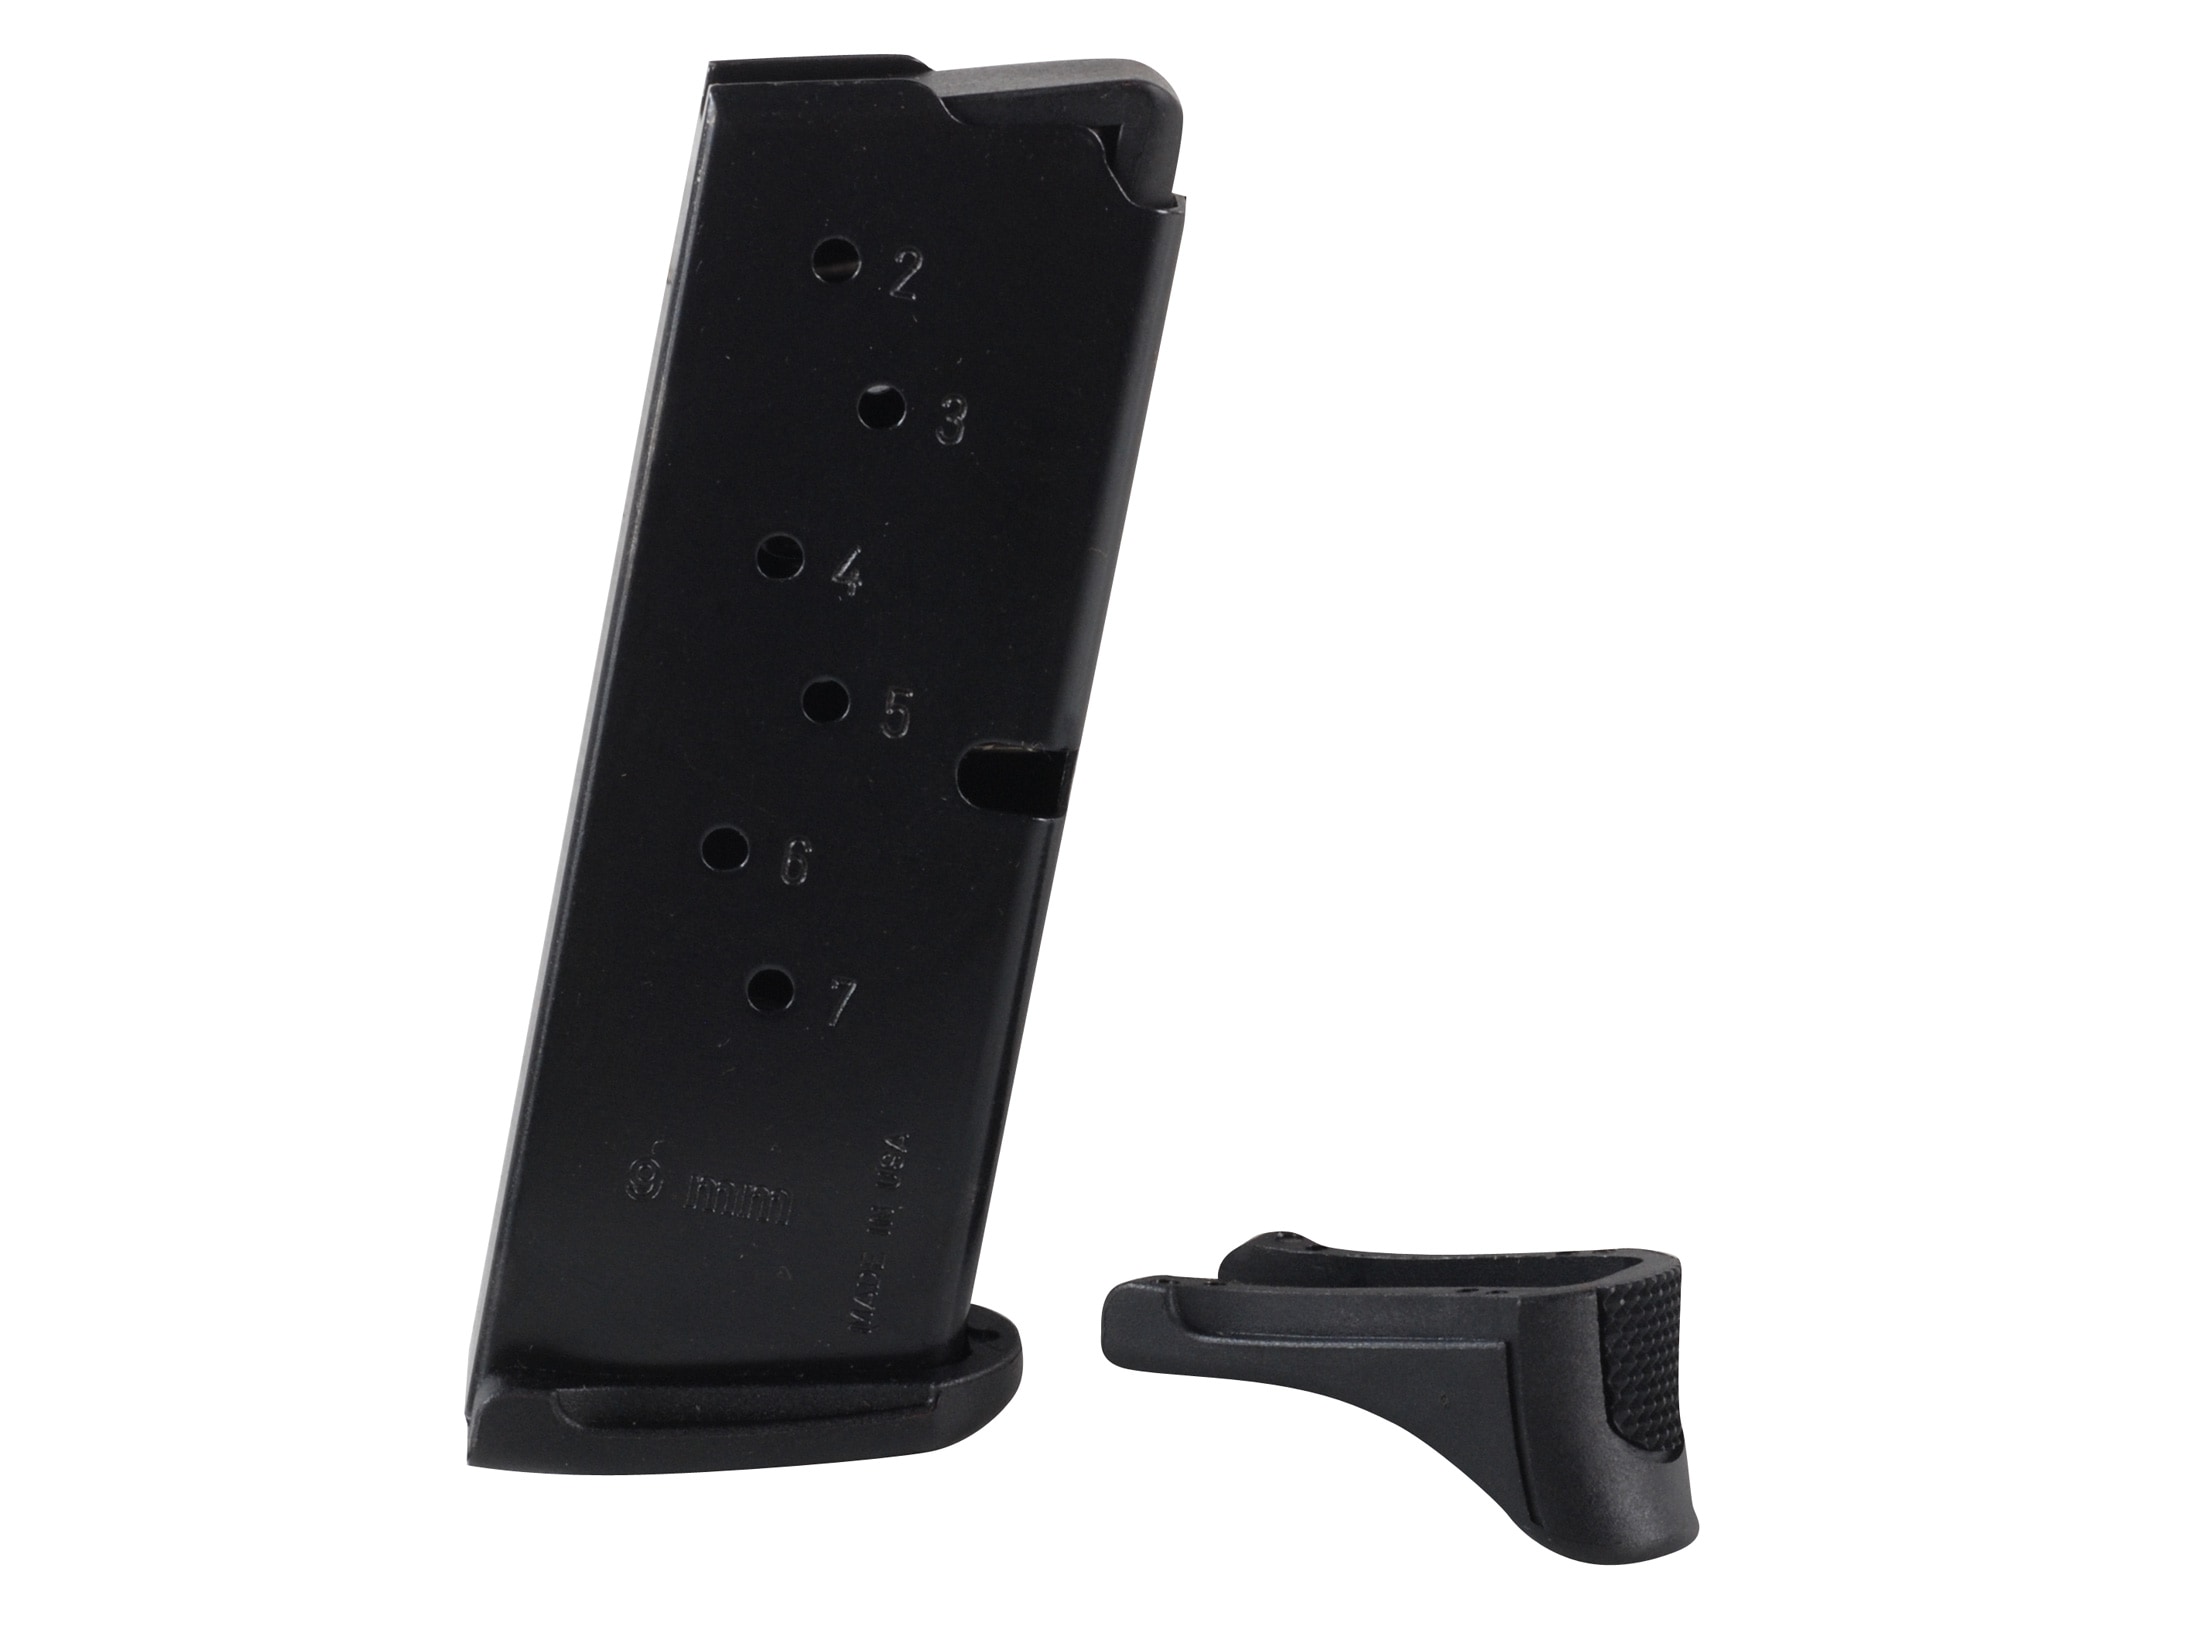 Ruger EC9s//LC9s 7Rd Mag 9mm Luger Polymer Extended Base Plate Steel Body 2PK